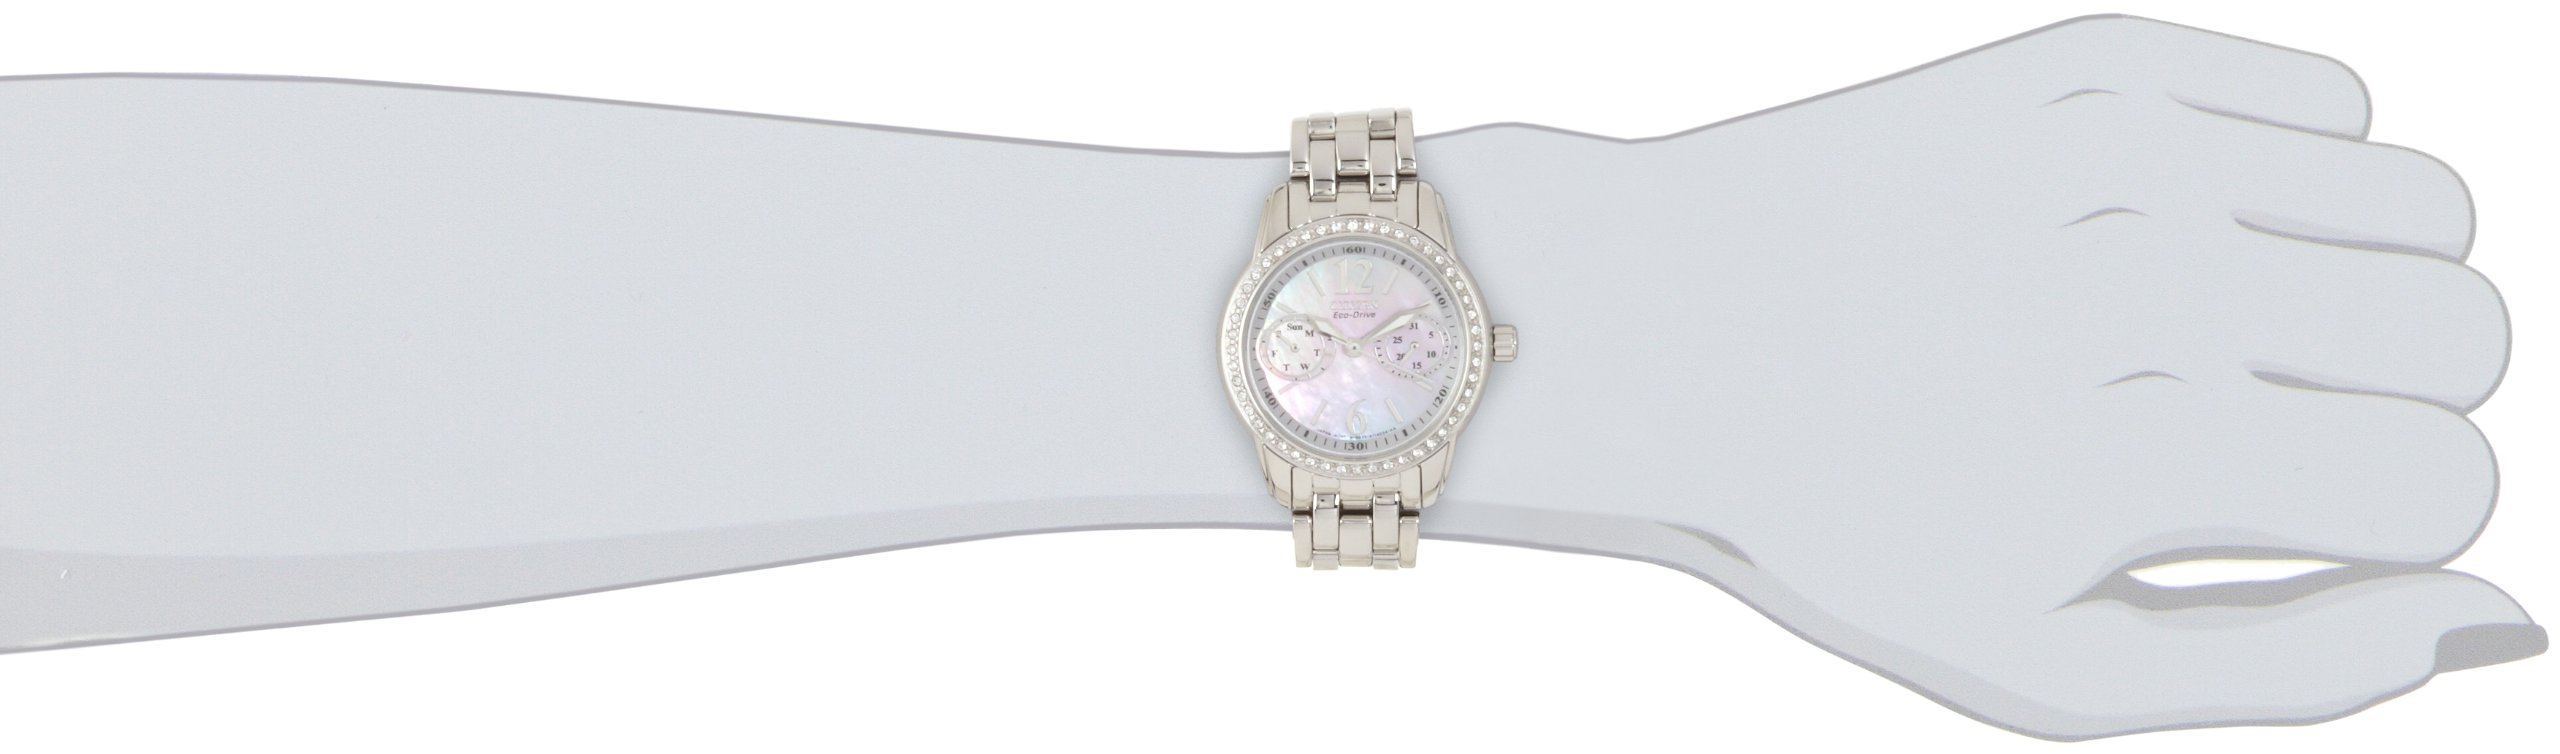 Citizen Women's Eco-Drive Dress Classic Crystal Watch in Stainless Steel, Mother of Pearl Dial (Model: FD1030-56Y)